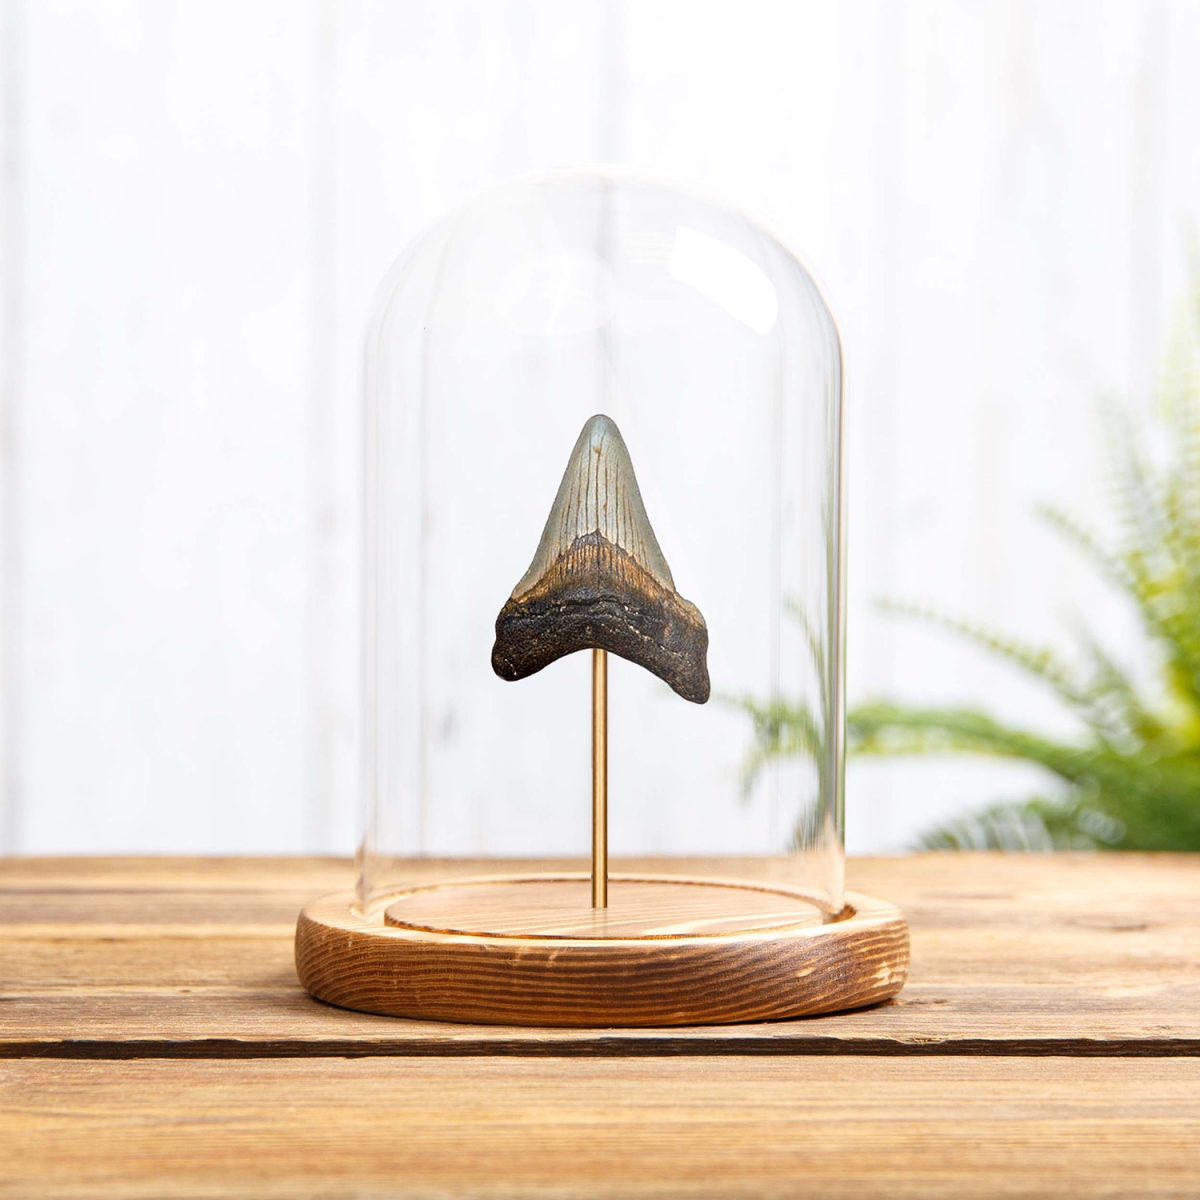 Medium Megalodon Shark Tooth Fossil in Glass Dome with Wooden Base (Carcharodon megalodon)